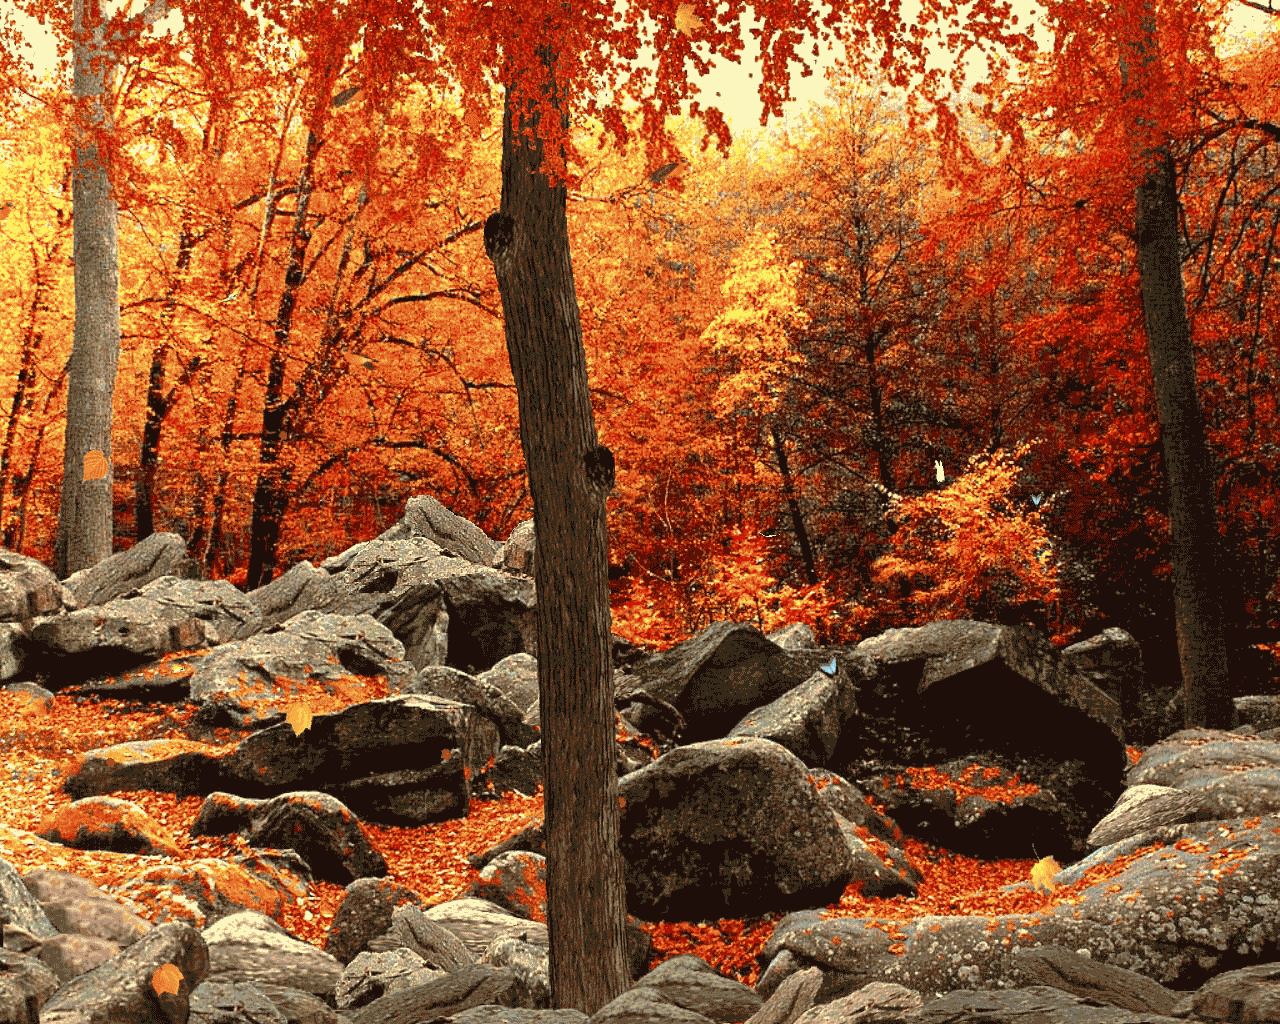 3d Autumn Woods Have Fun Customizing This Screen Saver To Your